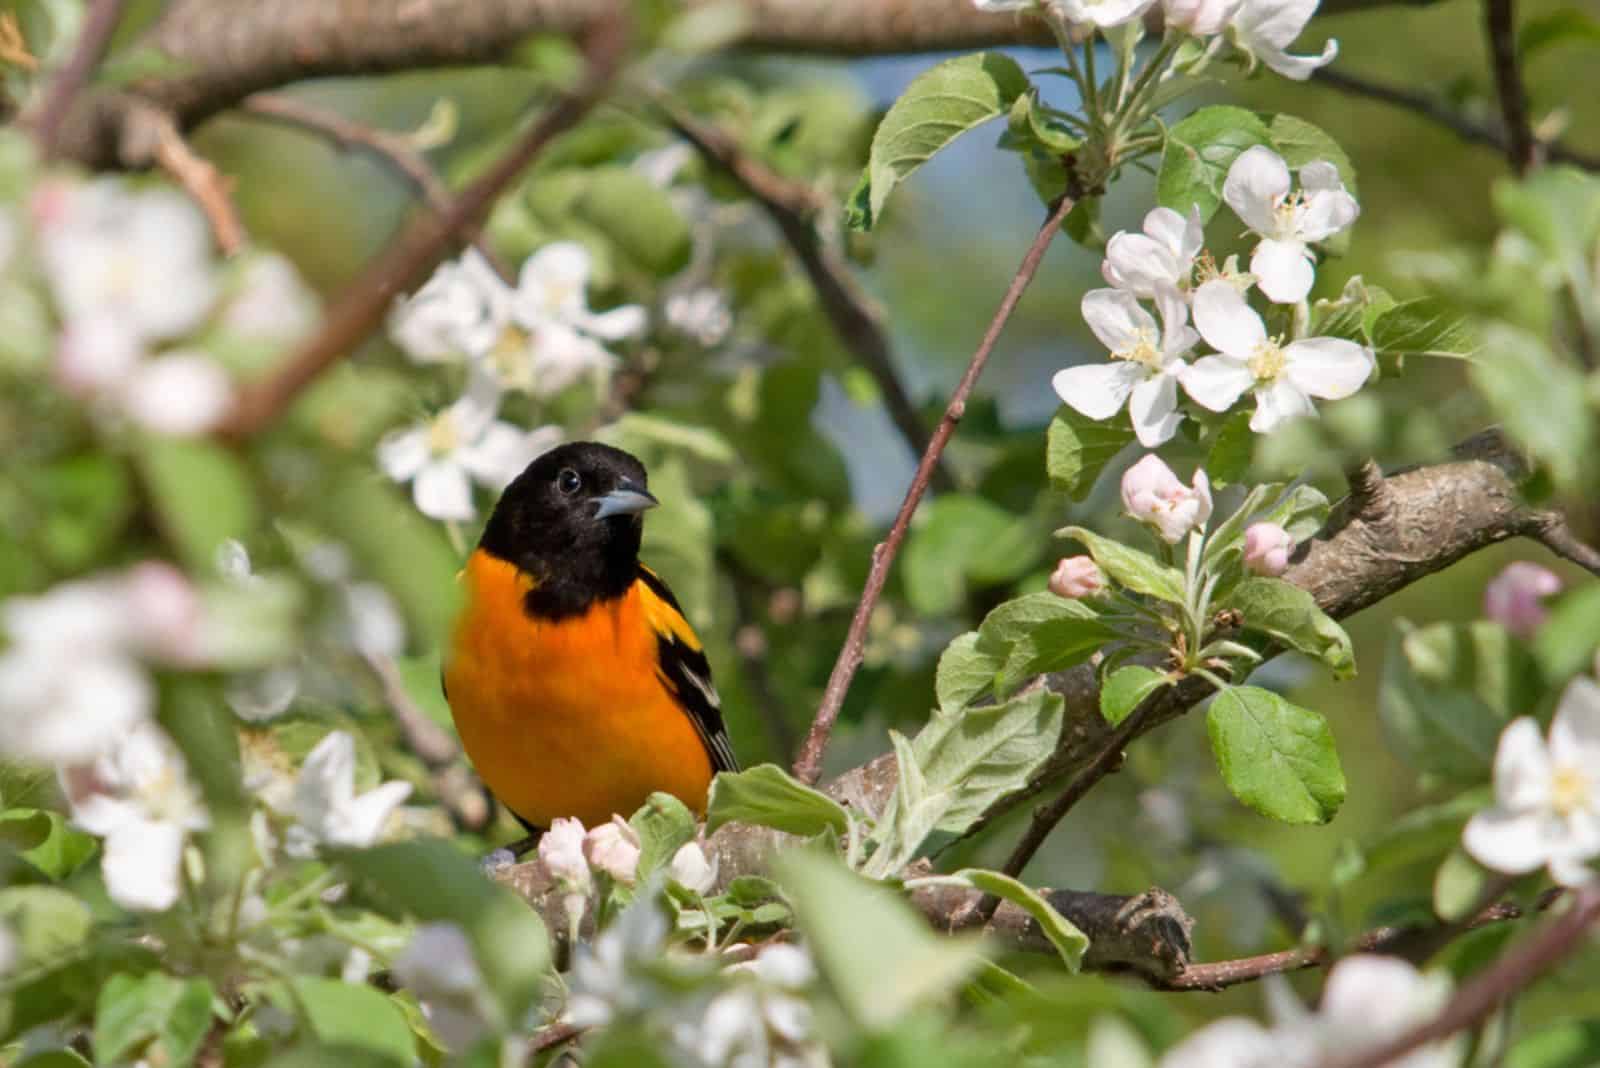 Oriole sitting amongst the vibrant spring blooms